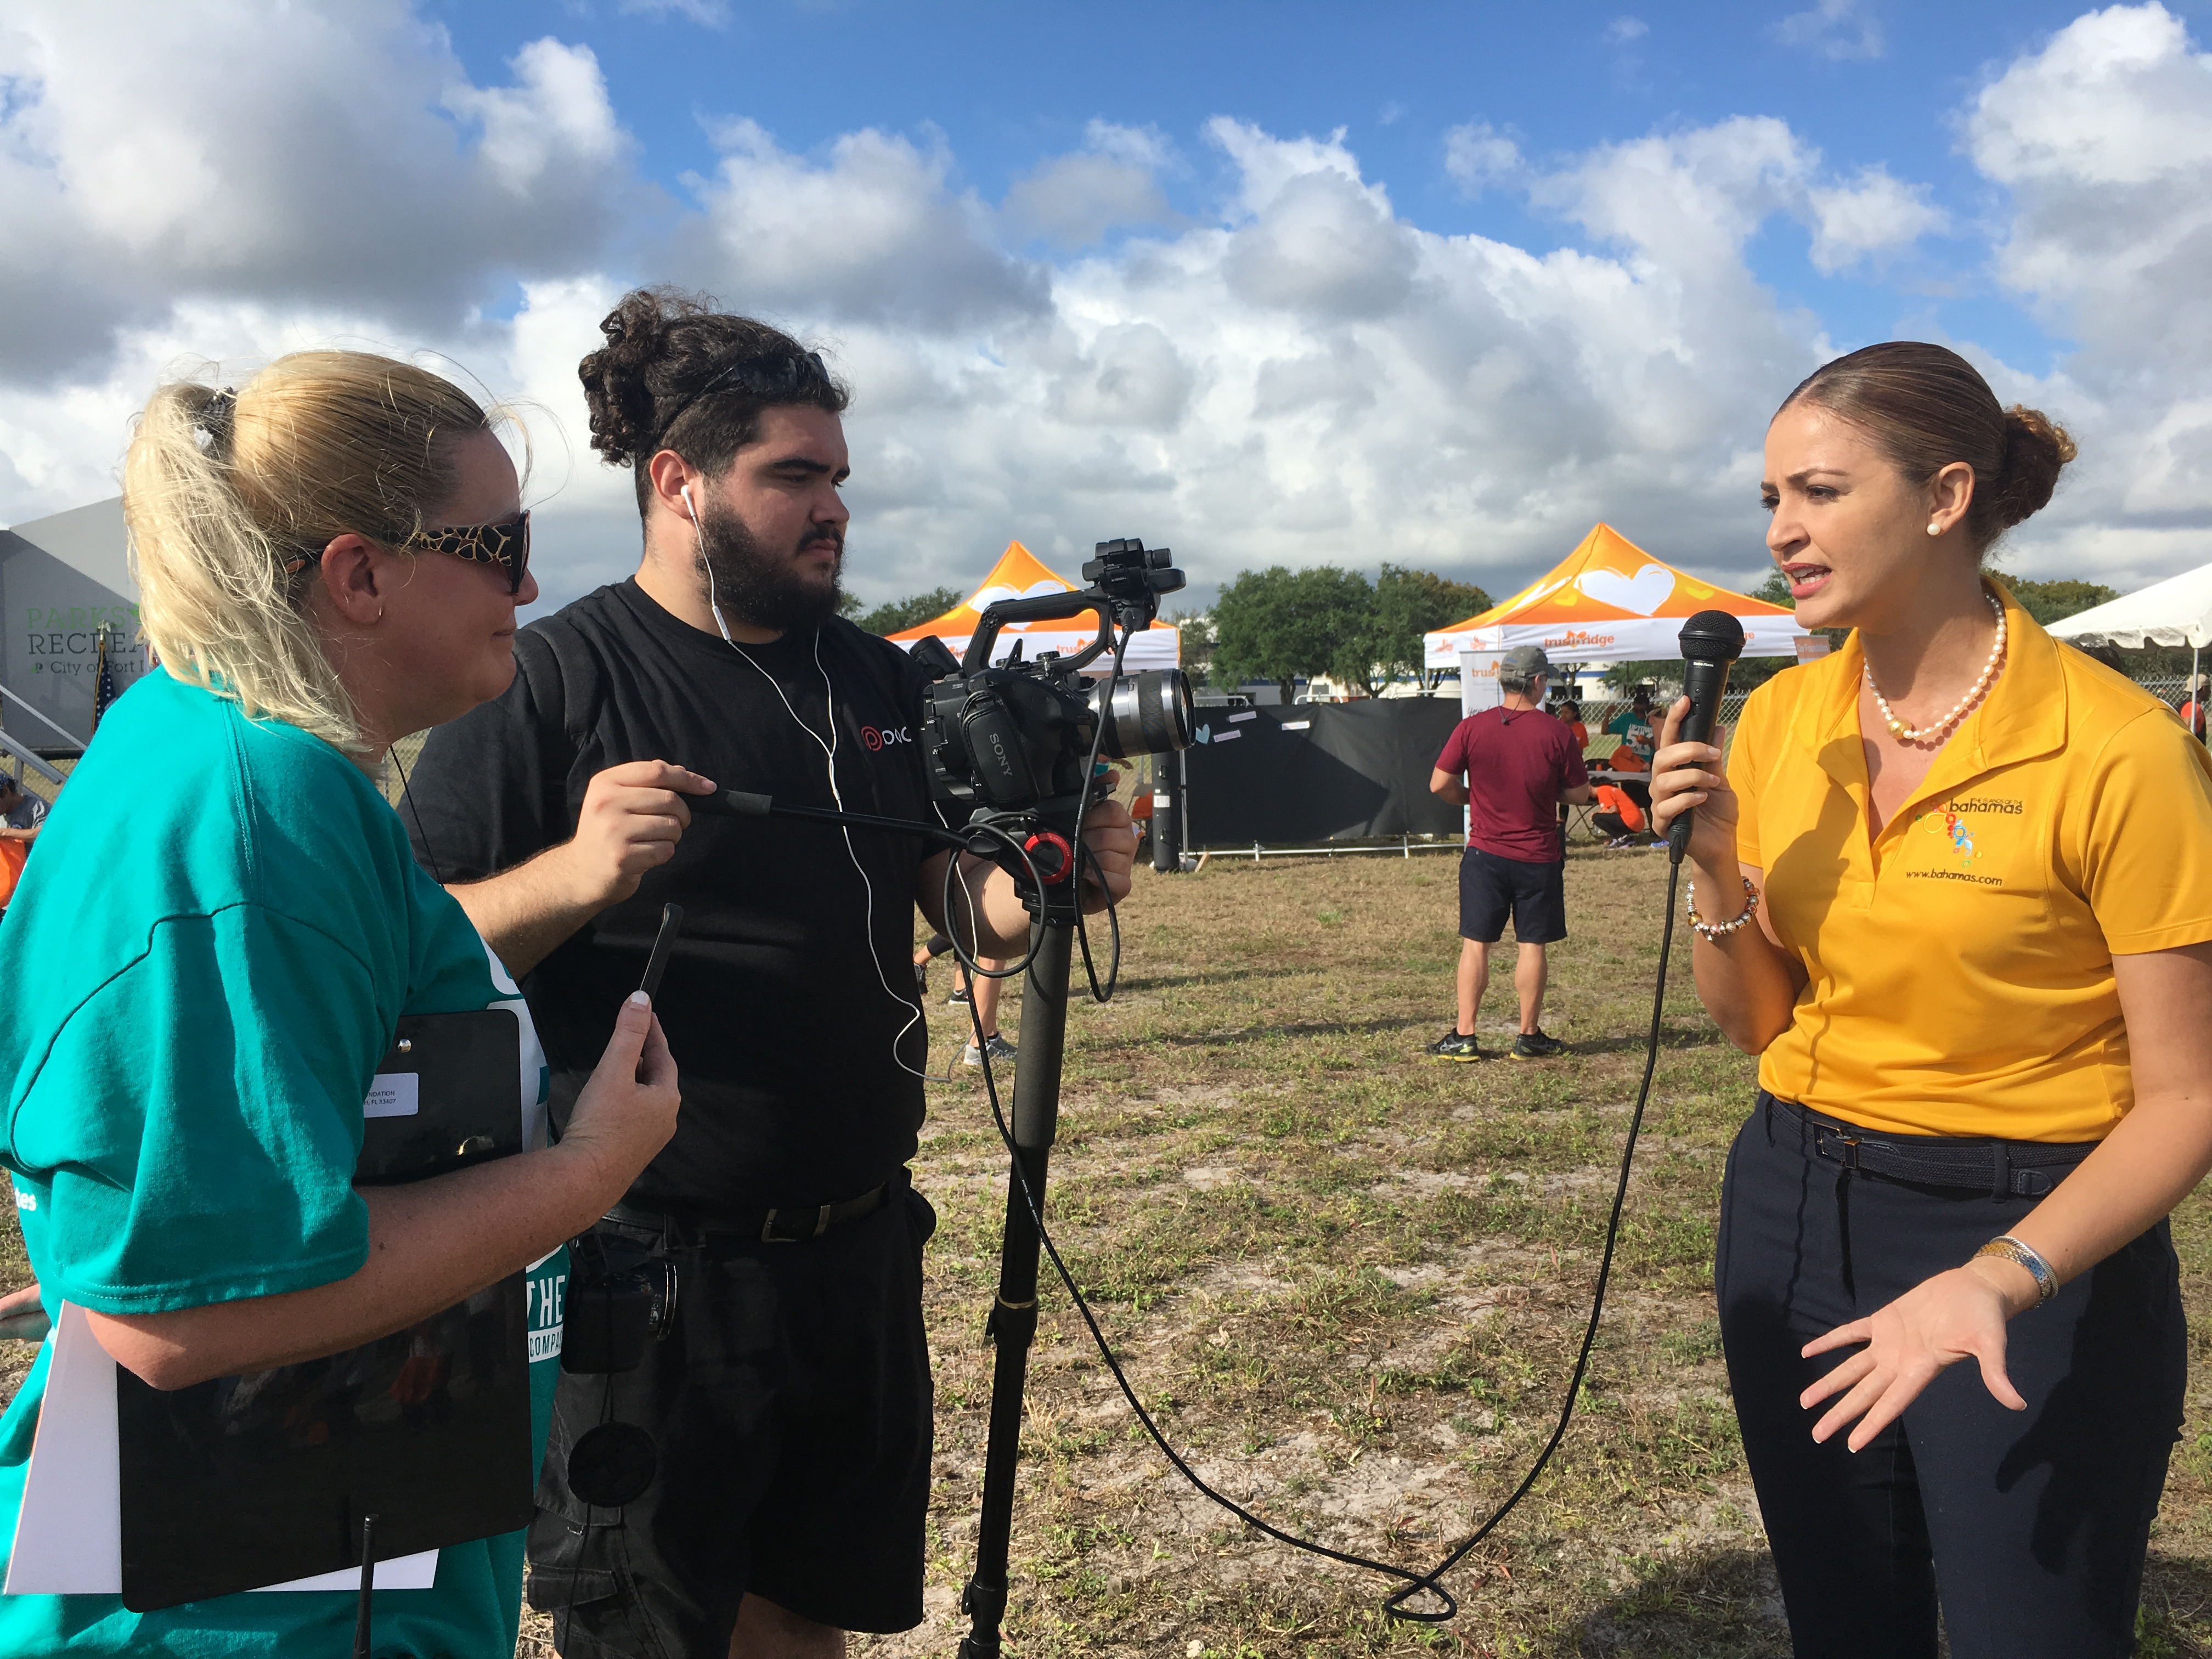 District Manager BTO Florida Office being Interviewed at 5k on the runway race